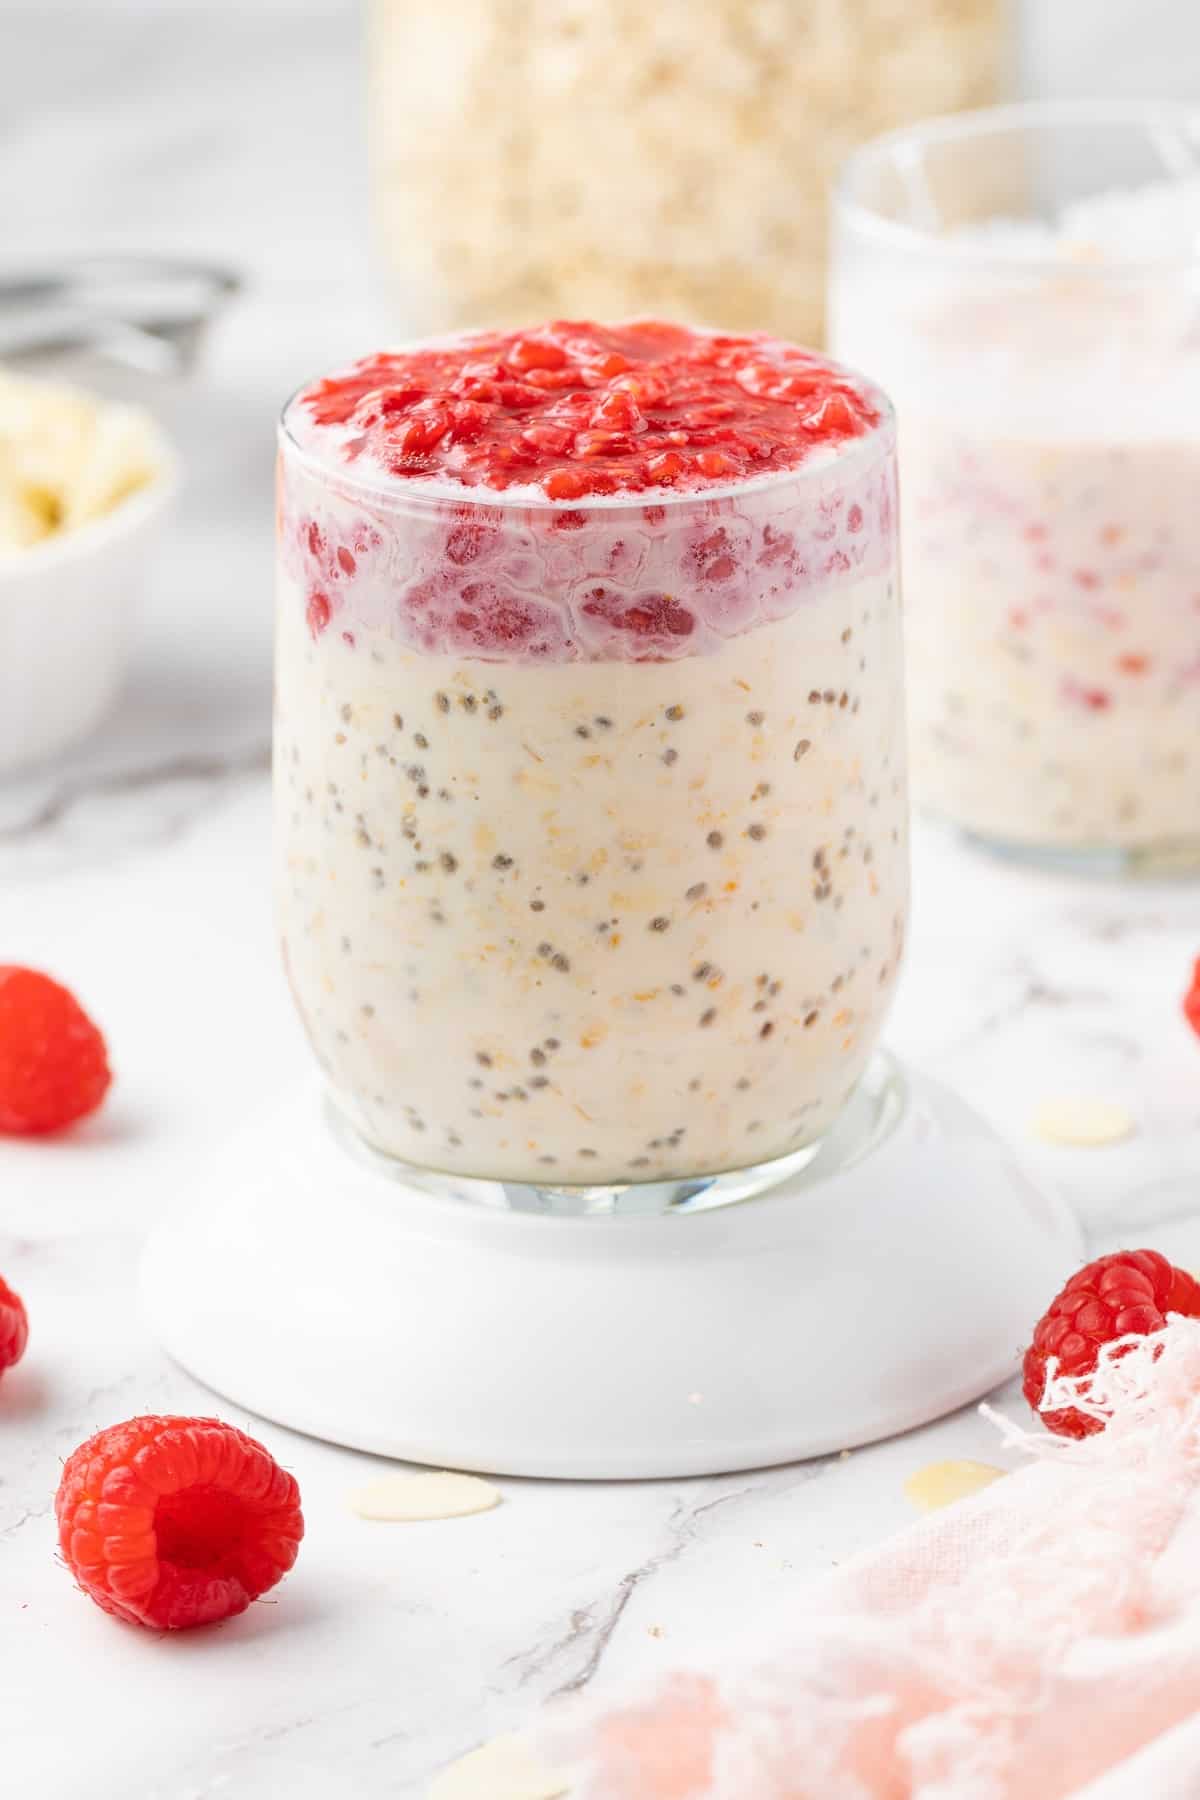 Glass jar of overnight oats topped with mashed raspberries, sitting on a white saucer.